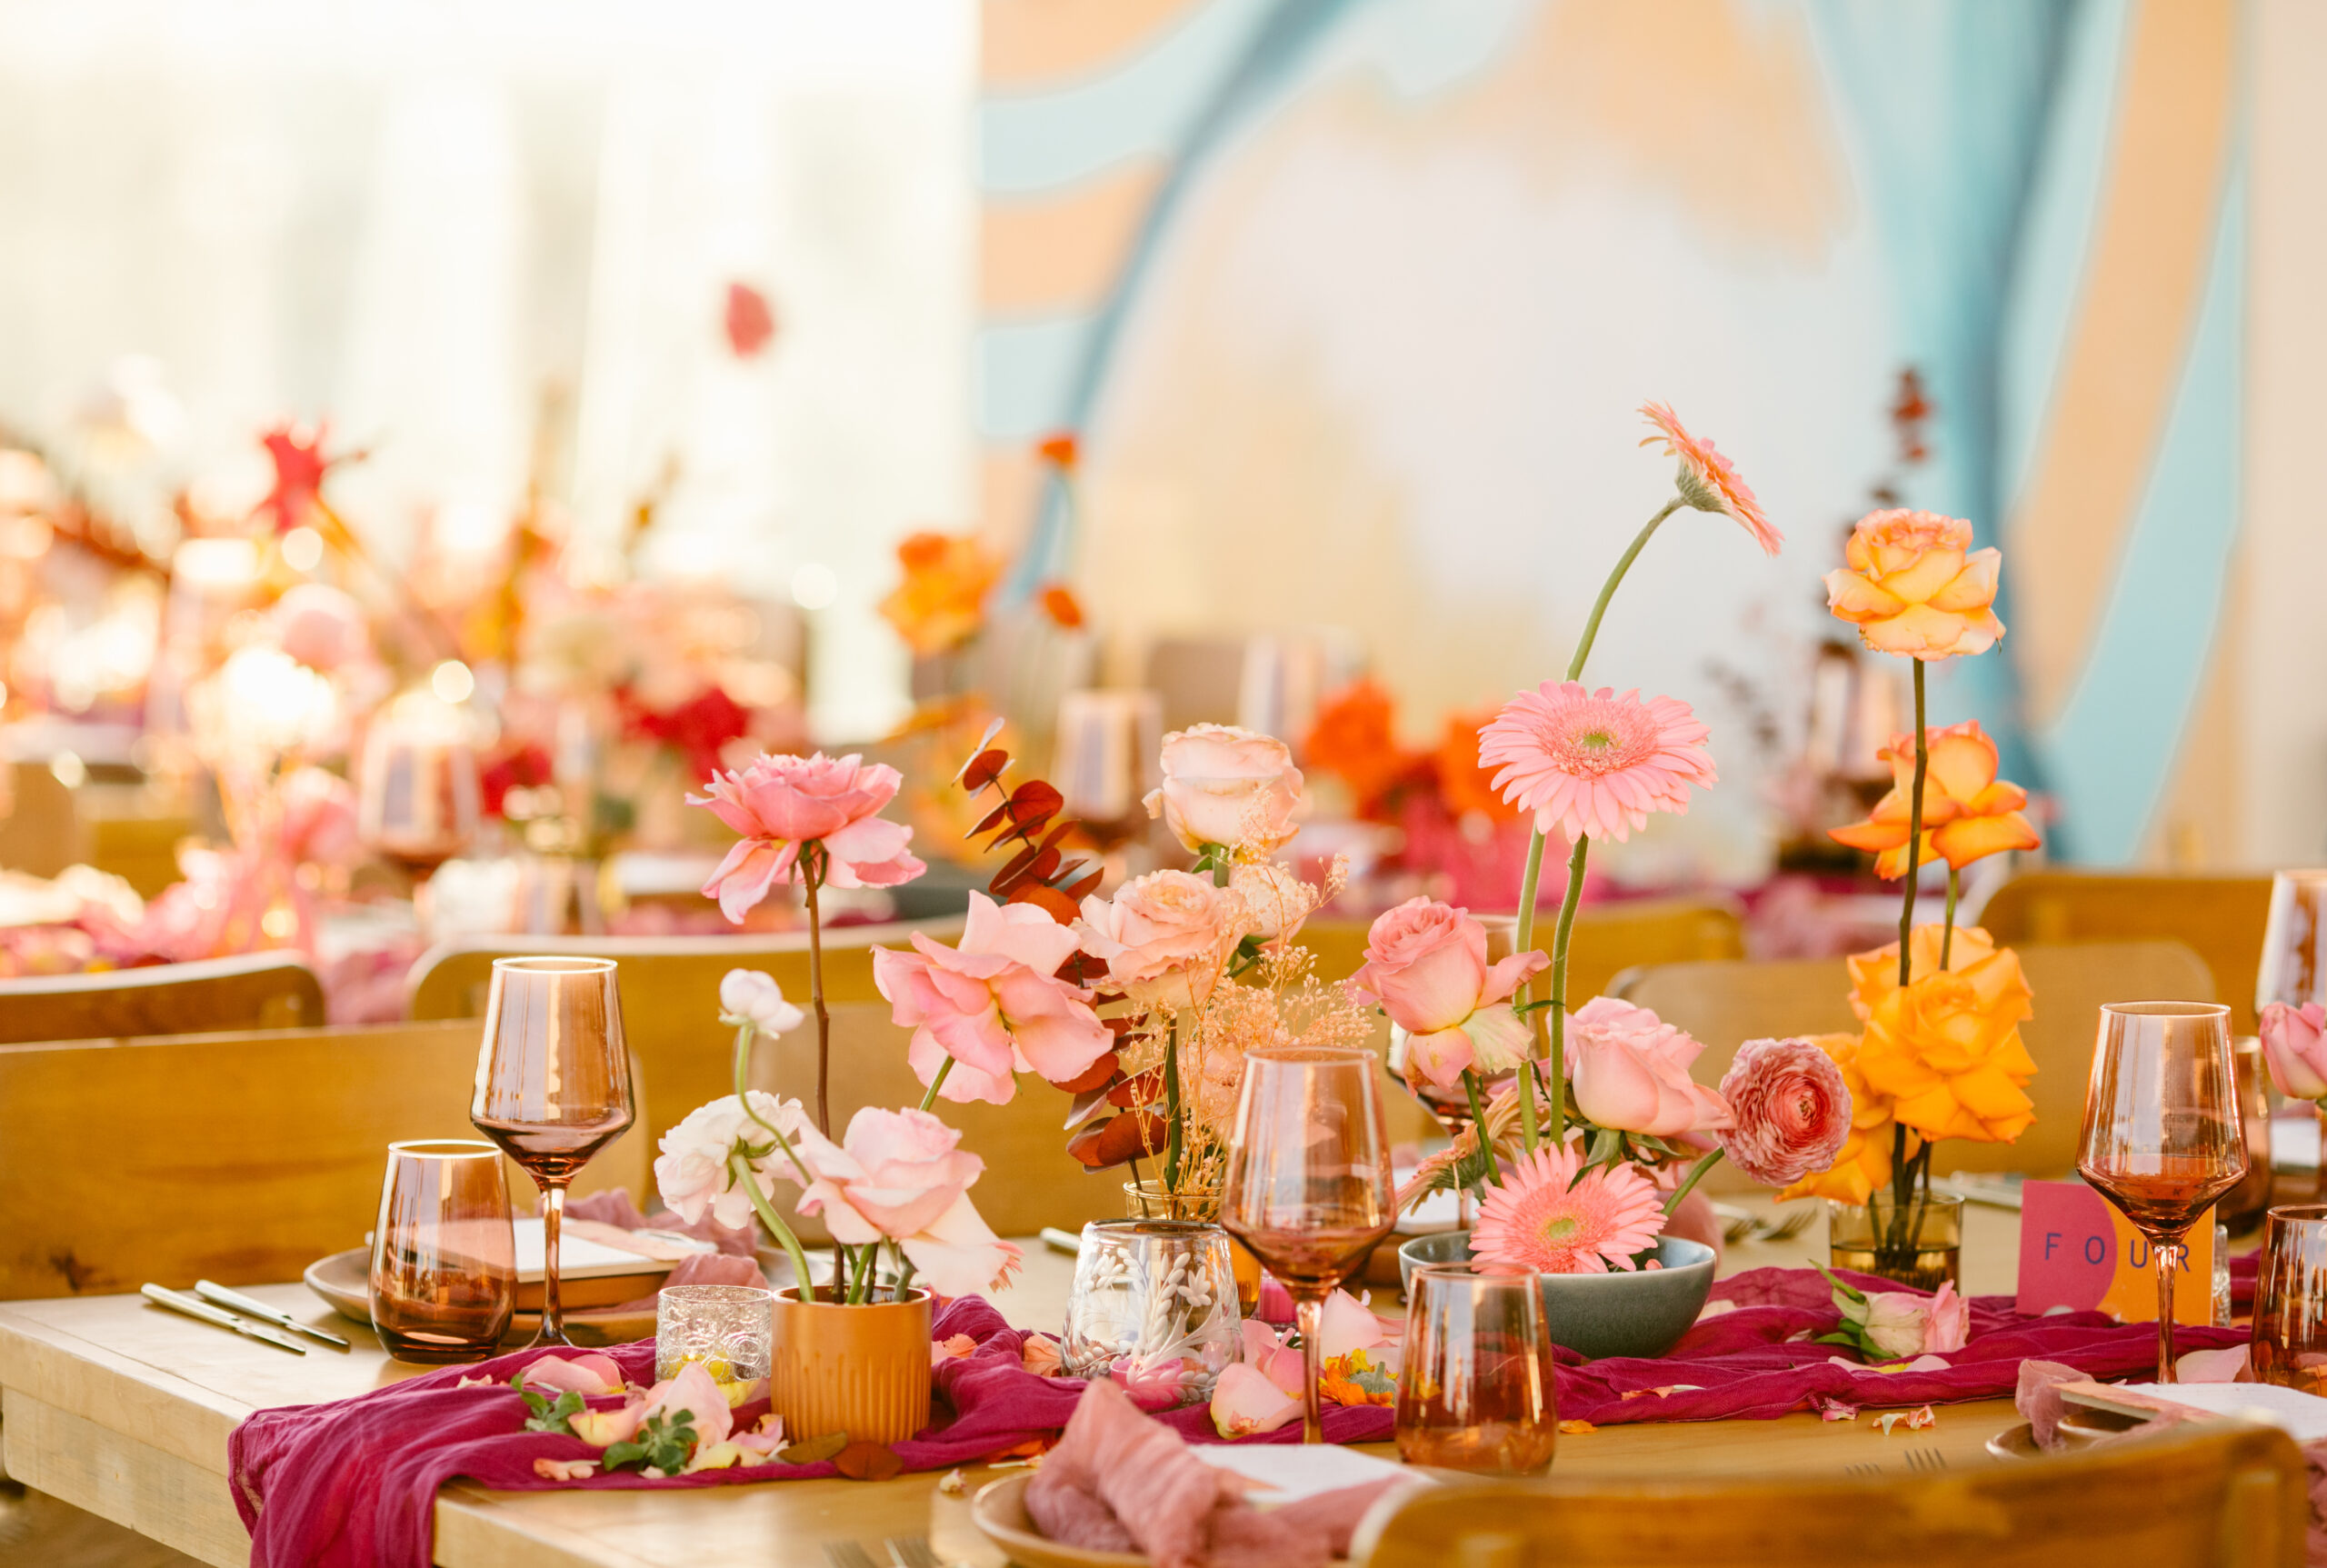 hotel el ganzo rooftop. mexican mural in background of wedding reception. colorful wedding florals. bright pinks, red, orange, yellow. fuchsia gauze runner on light wooden table. smokey pink colored glassware. wedding reception tabletop